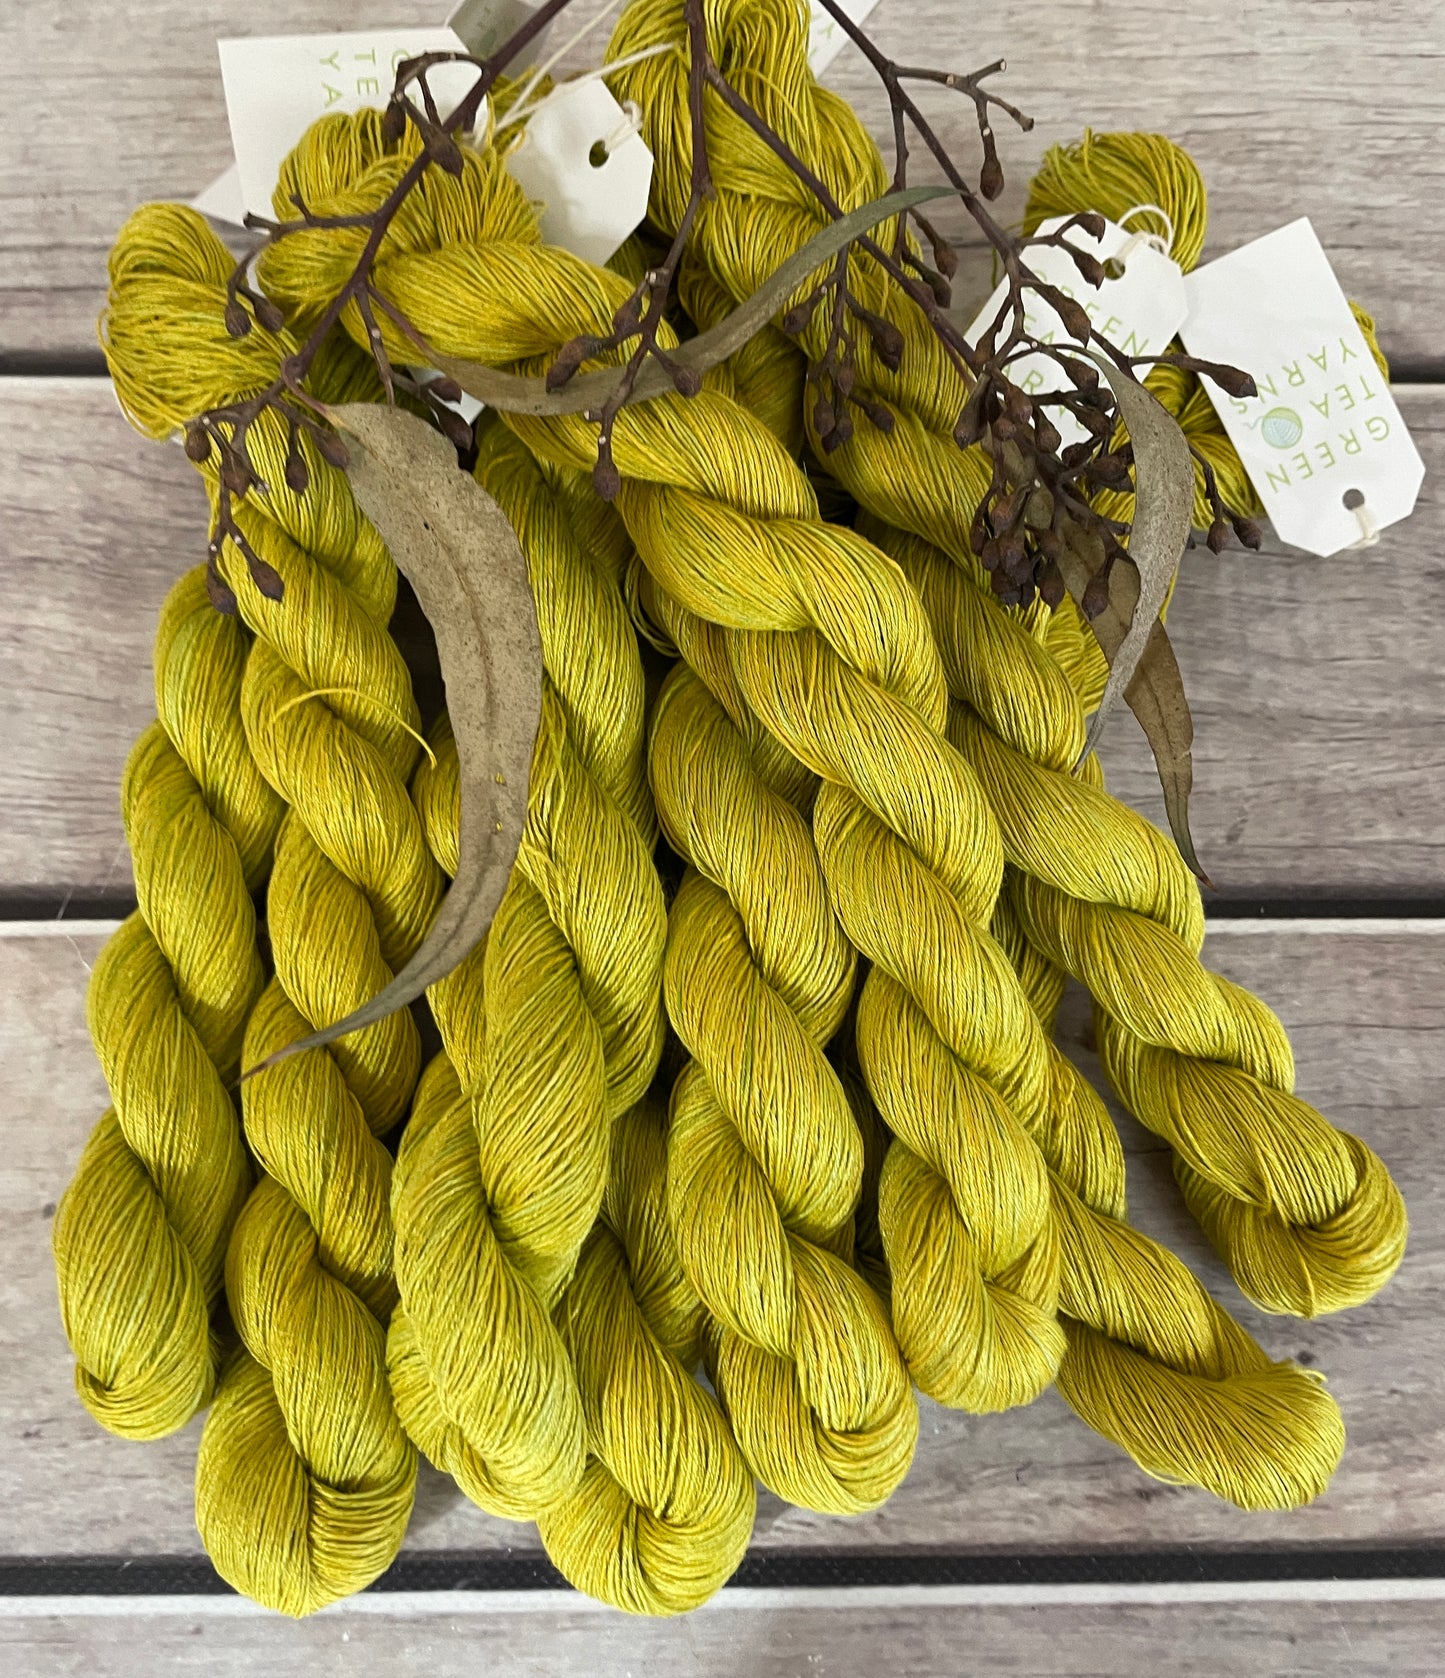 Green Age on Lotus pure linen yarn - 50 gm skeins